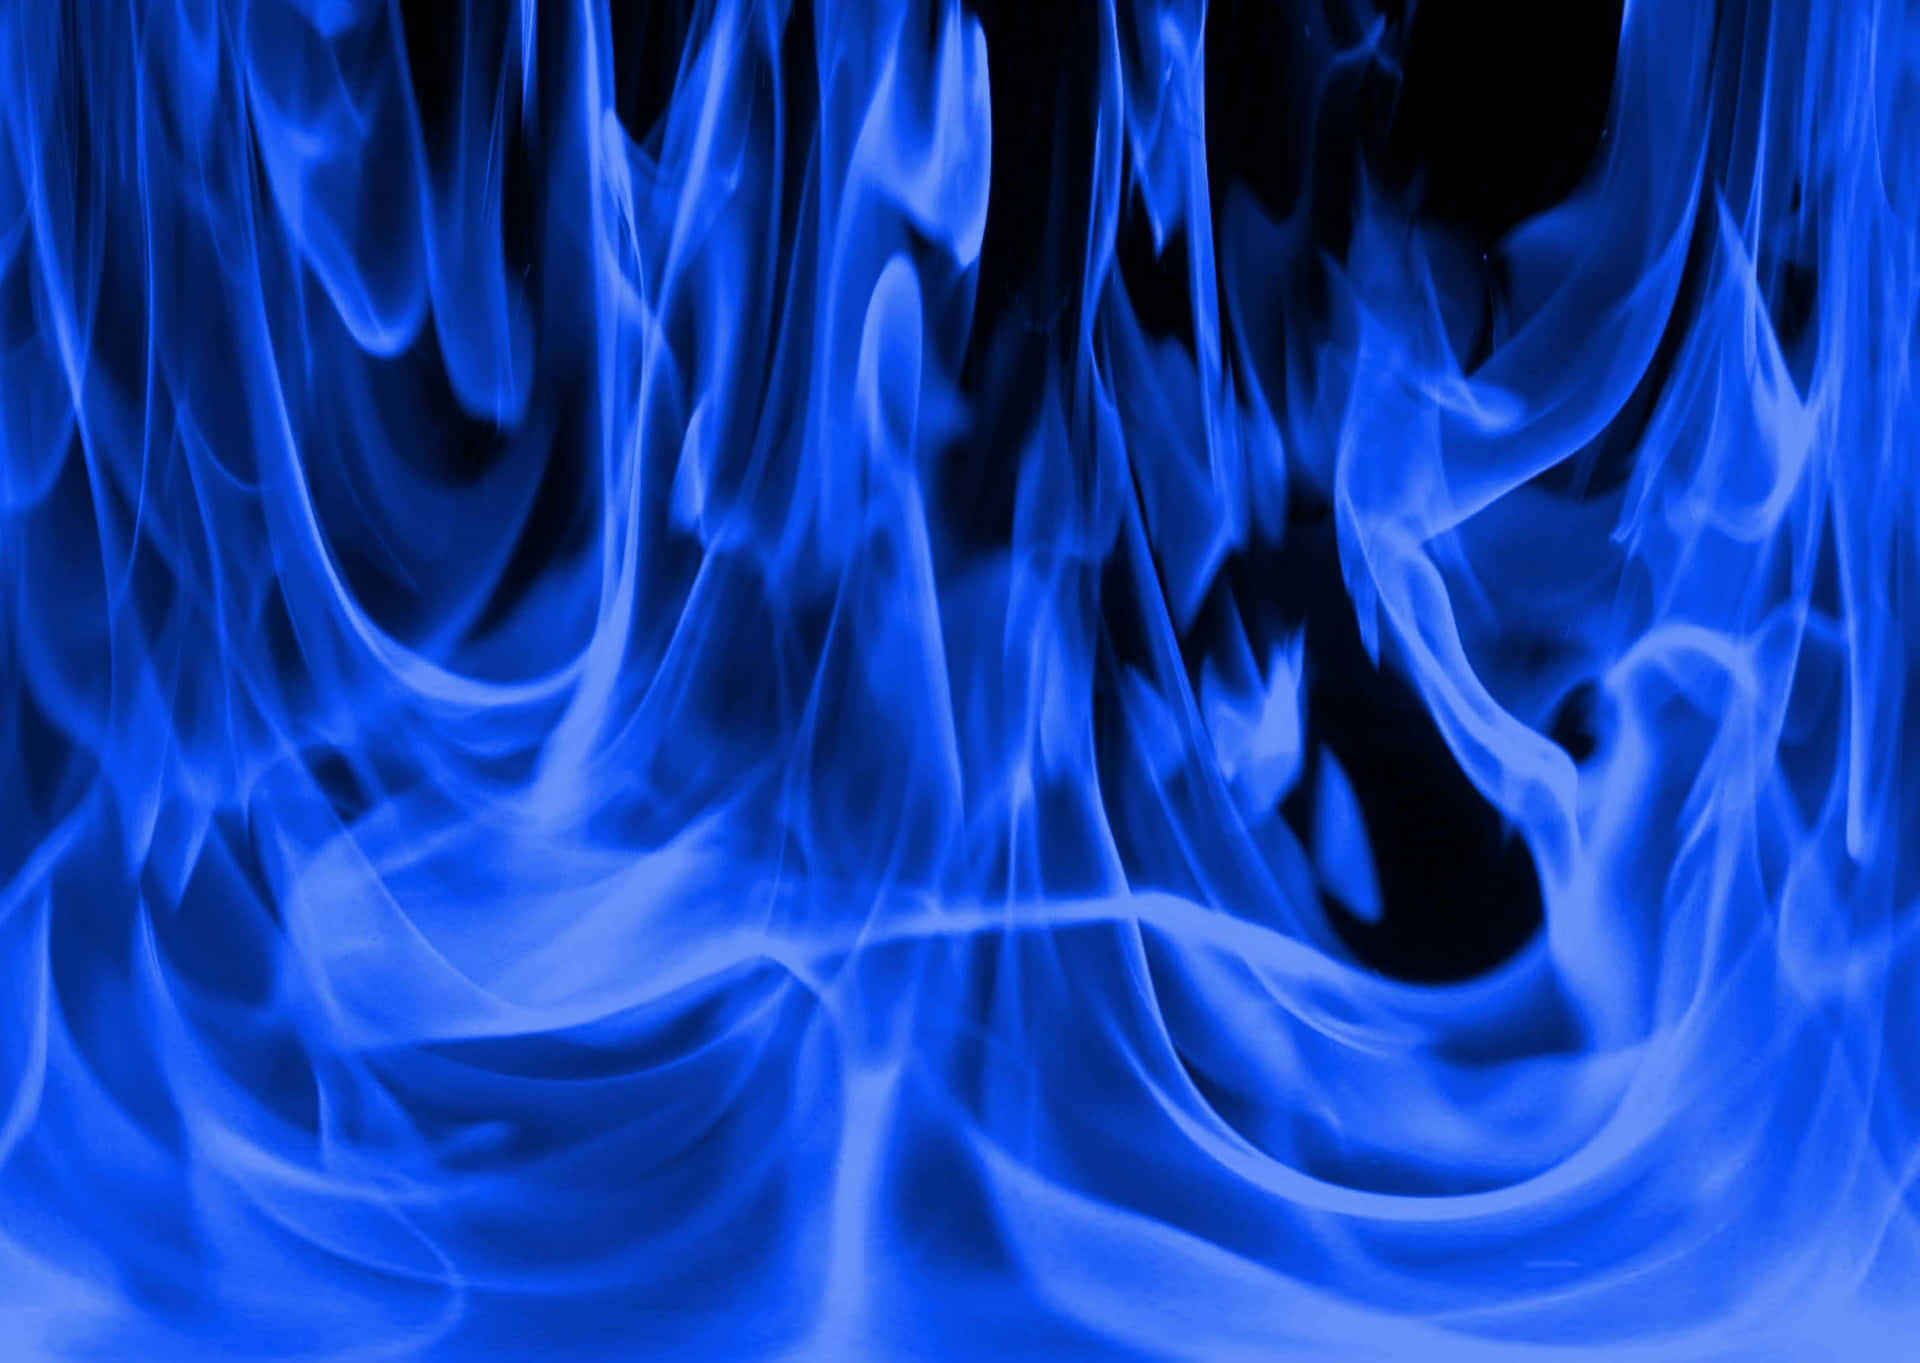 "Immersing yourself in the blue fire offers a truly awe-inspiring experience"